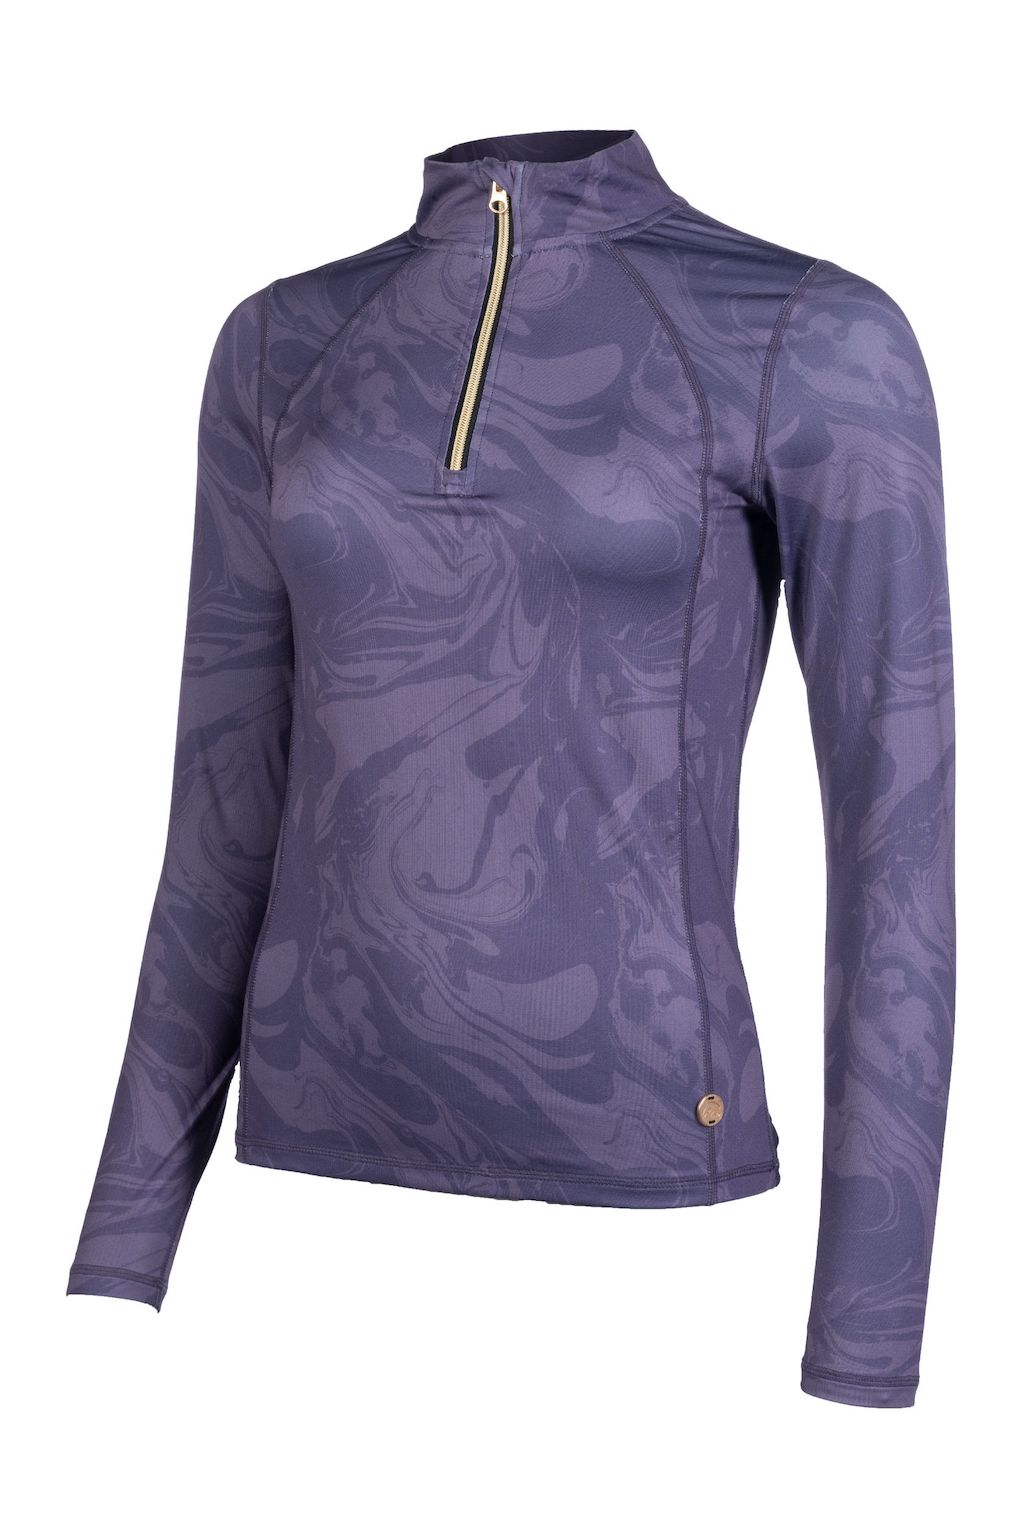 long sleeve purple top with marble pattern and gold zip